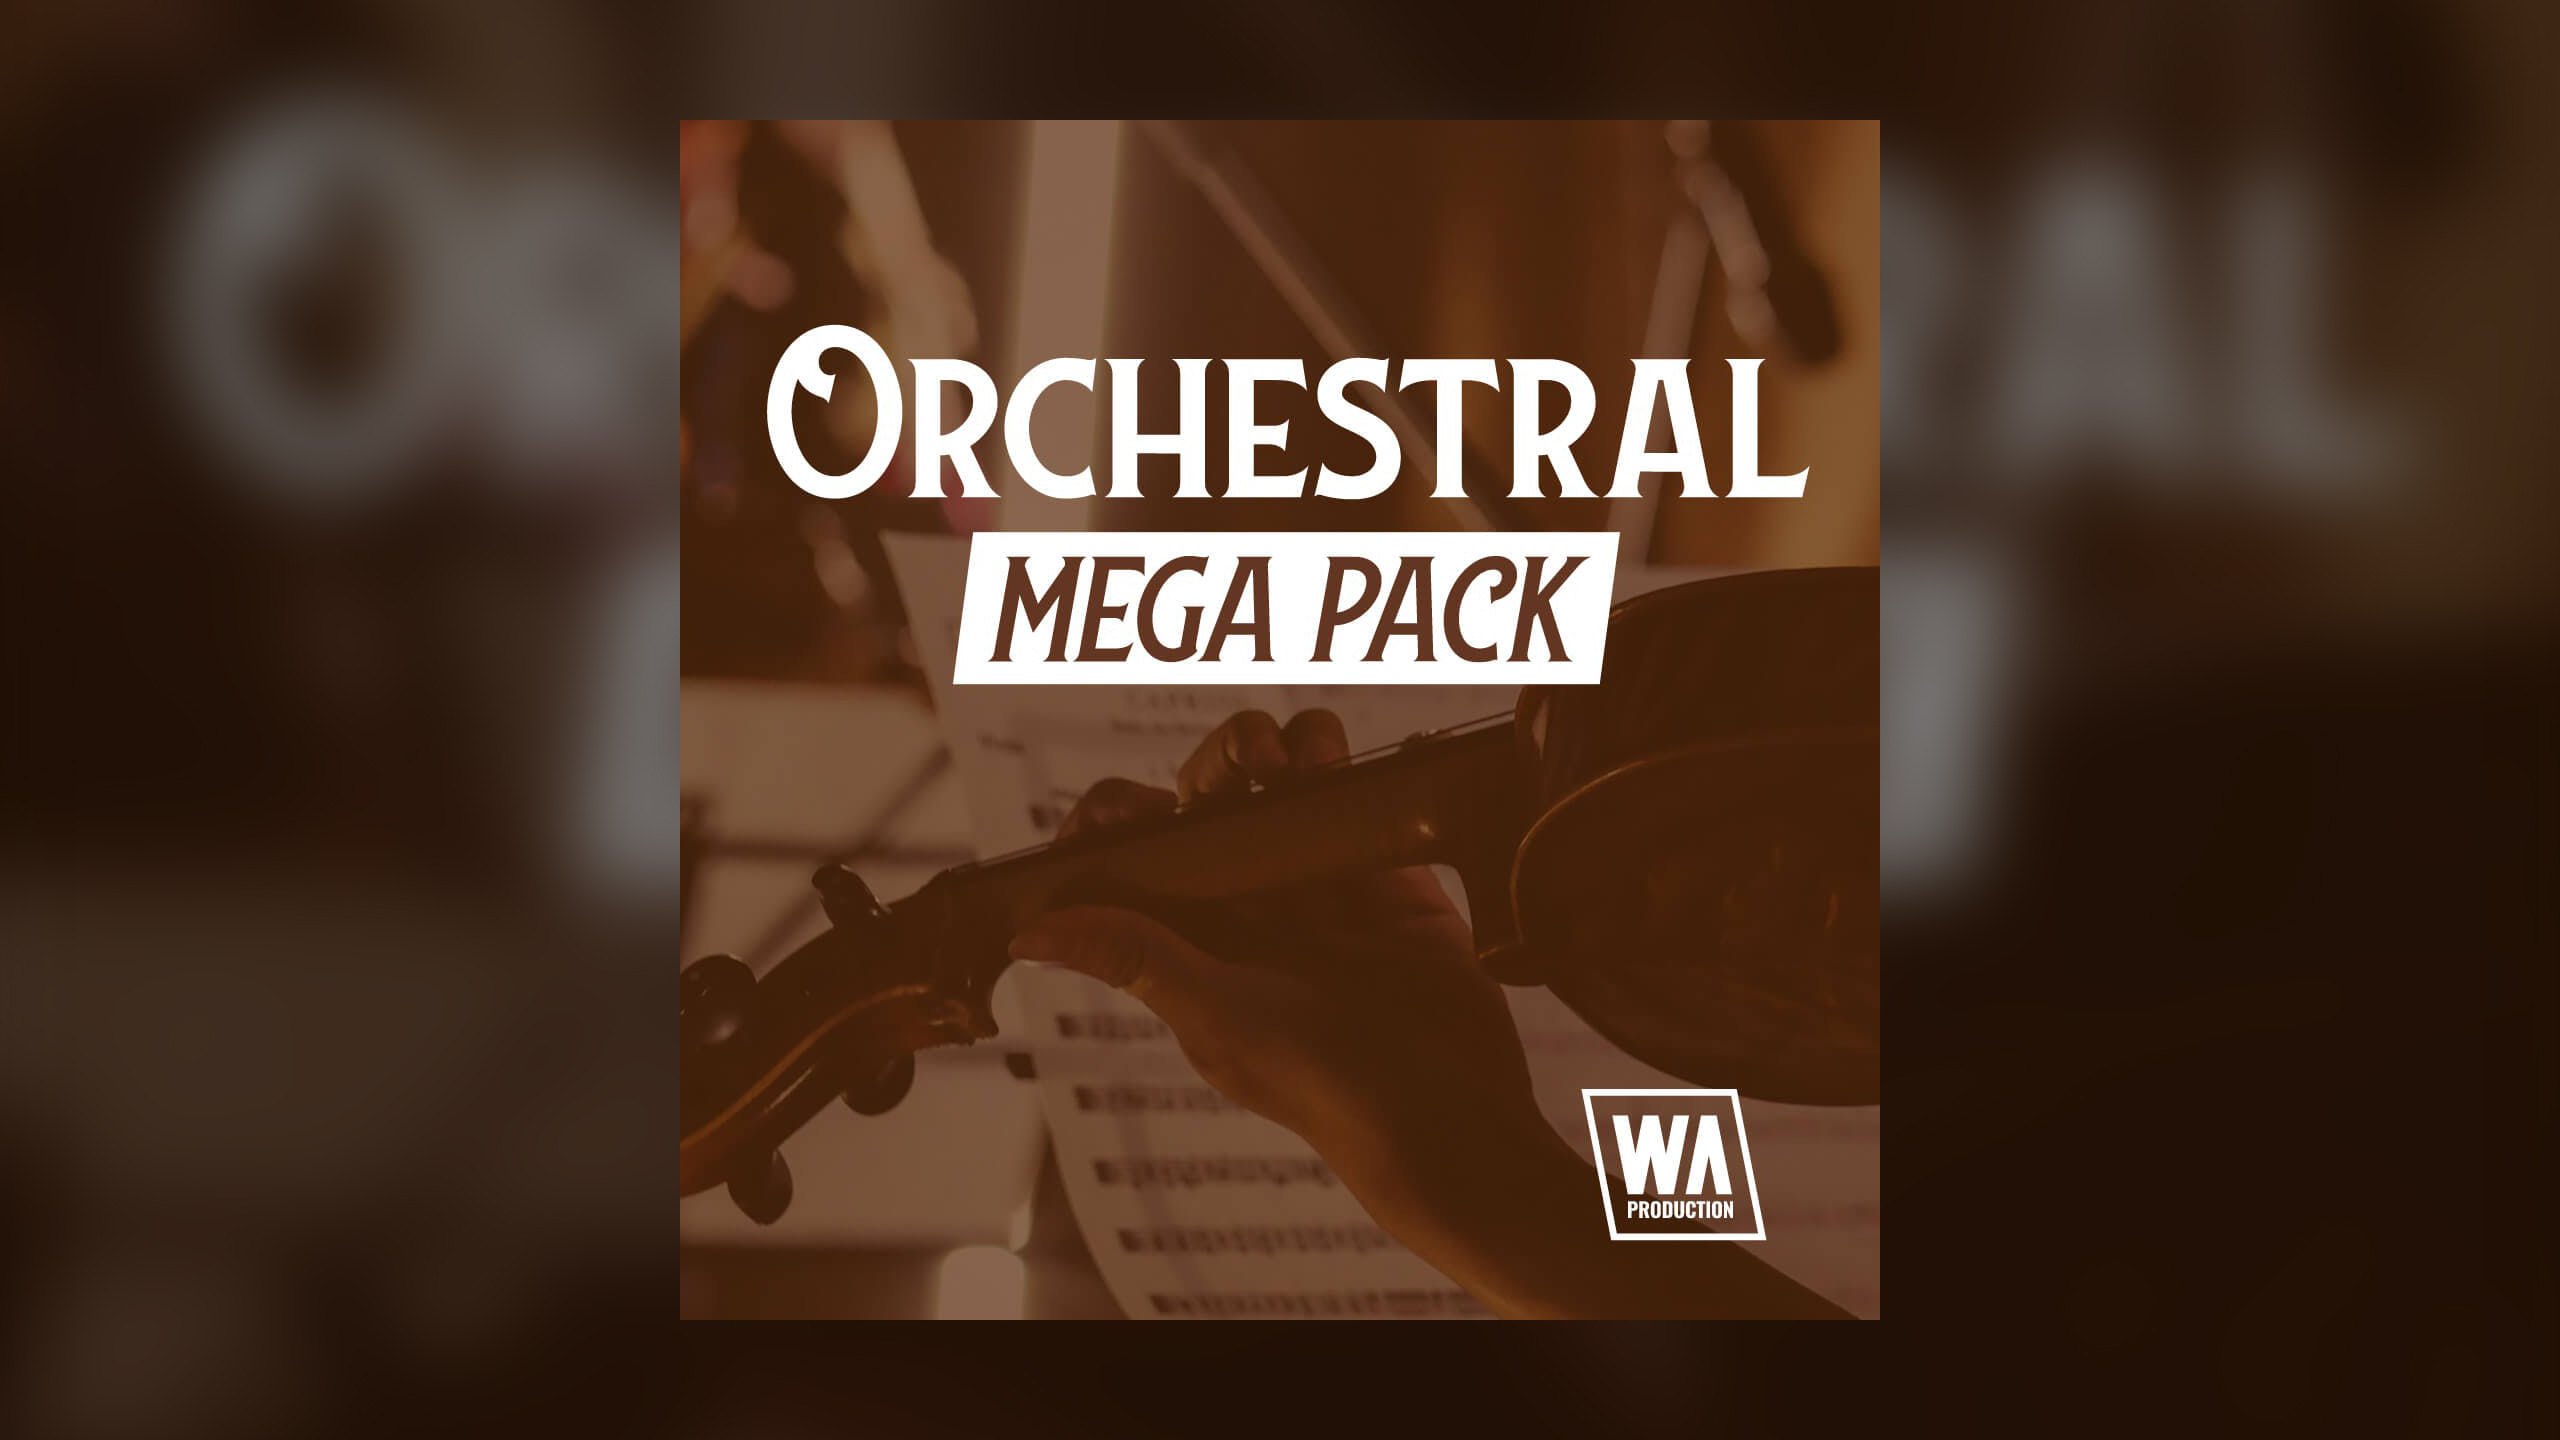 This free Orchestral Mega Pack includes everything you need to start producing epic orchestral music and more